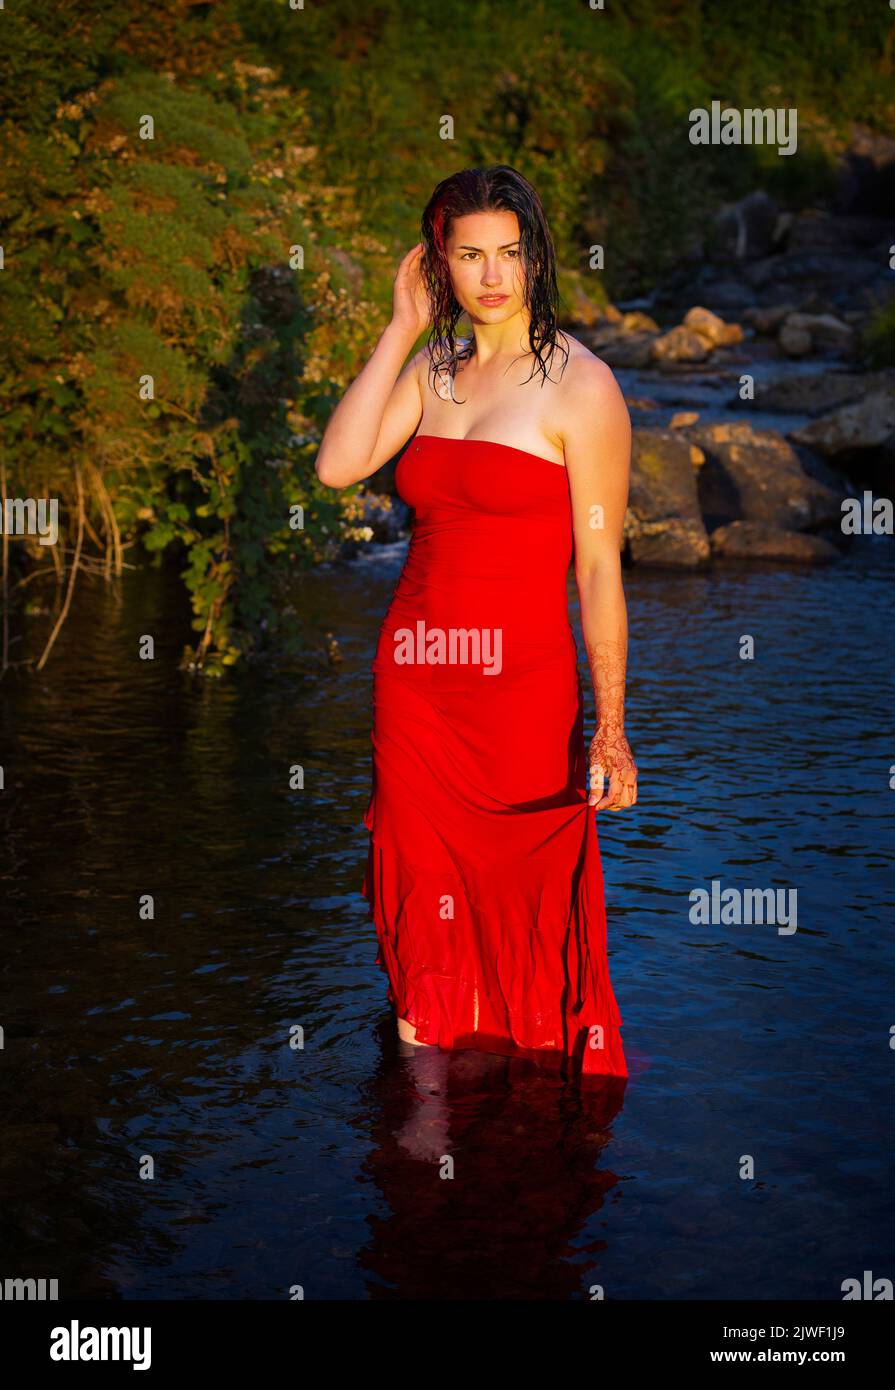 A beautiful young woman with a red dress cooling off in a river Stock Photo